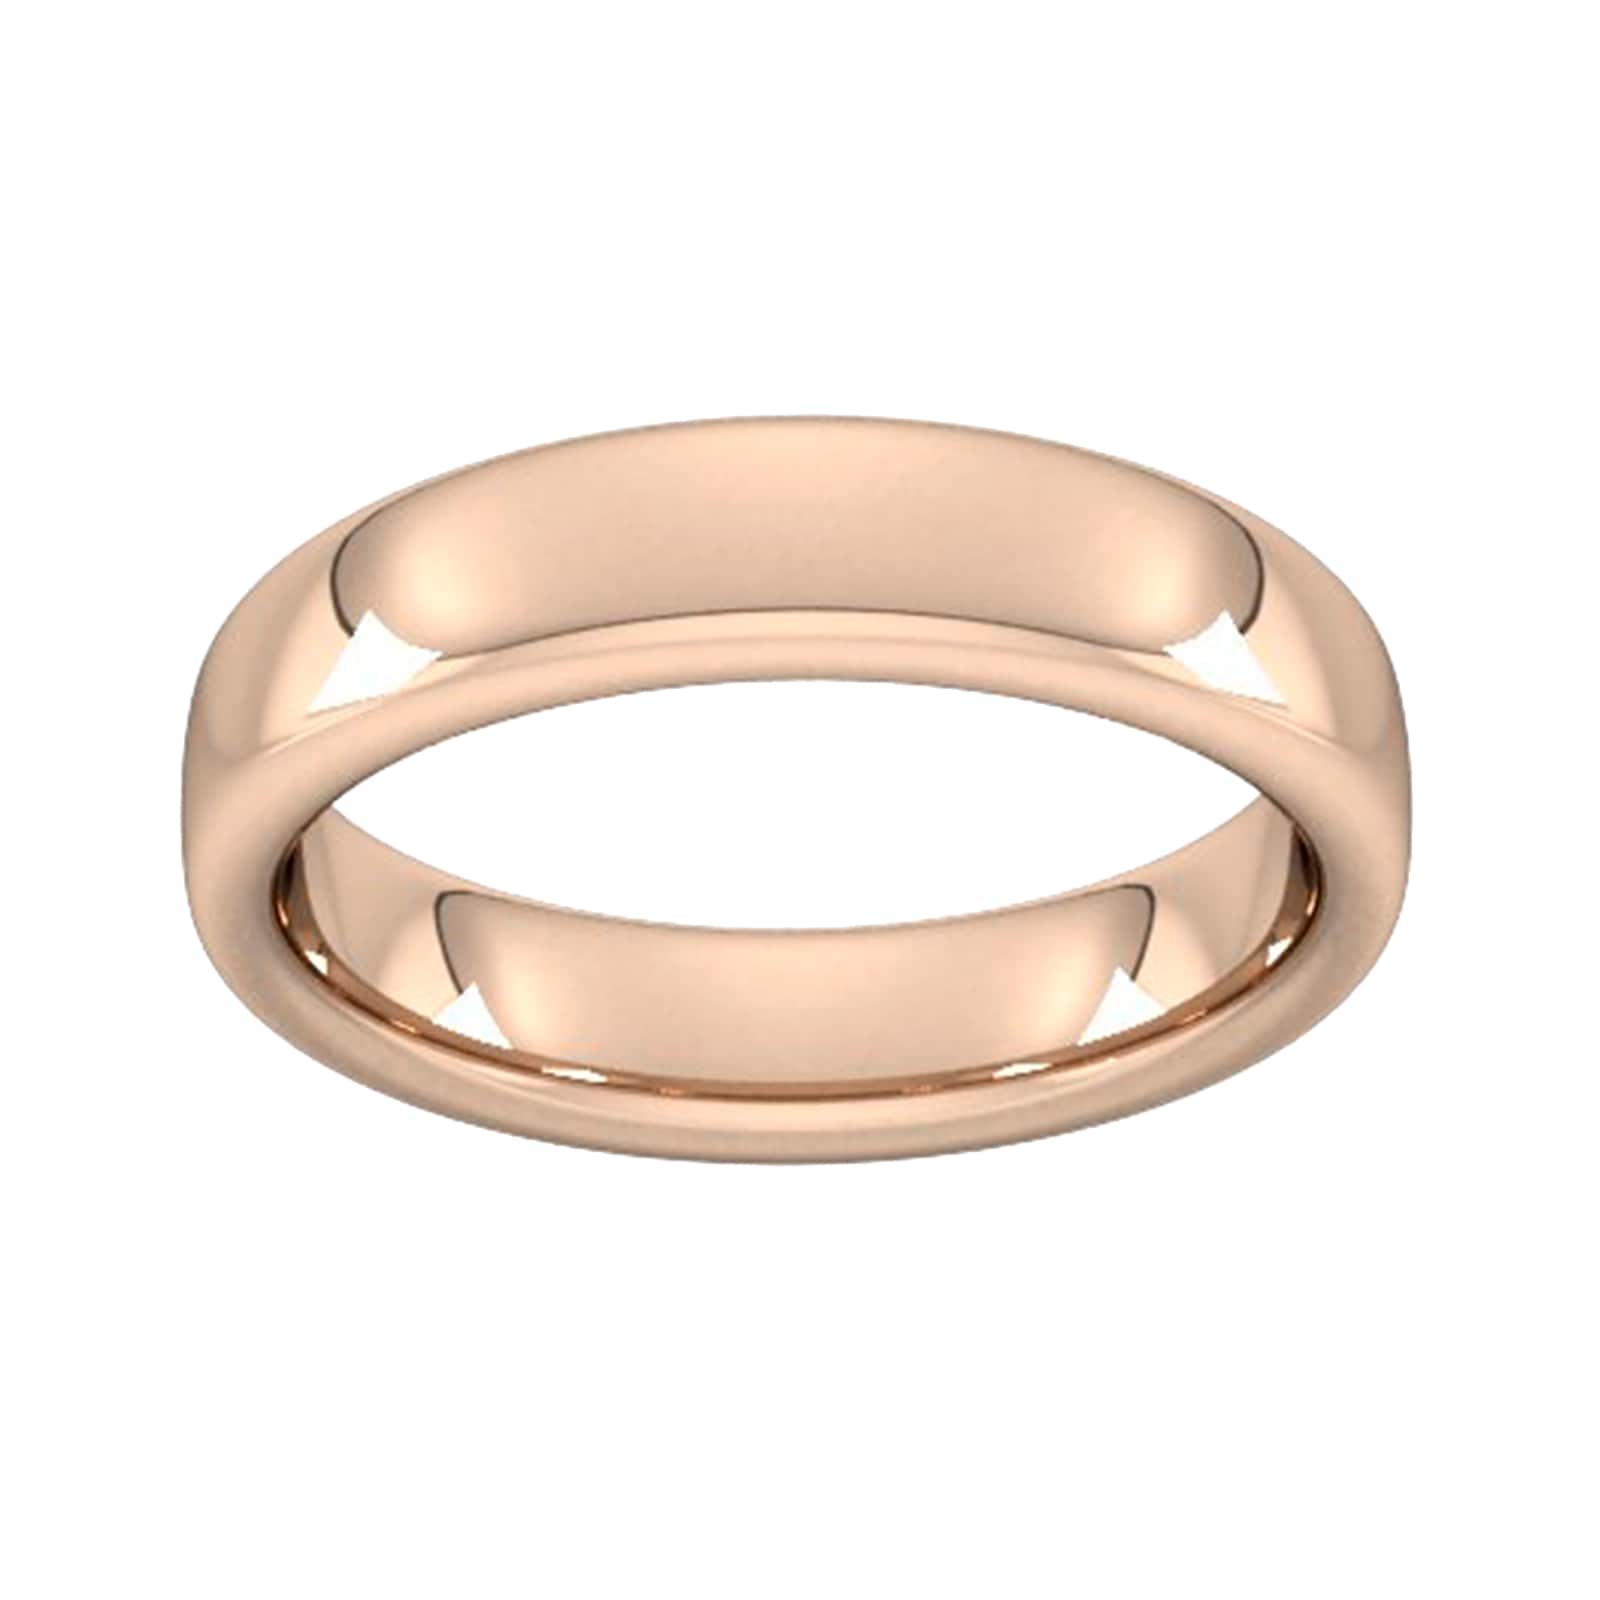 5mm Slight Court Extra Heavy Wedding Ring In 18 Carat Rose Gold - Ring Size J